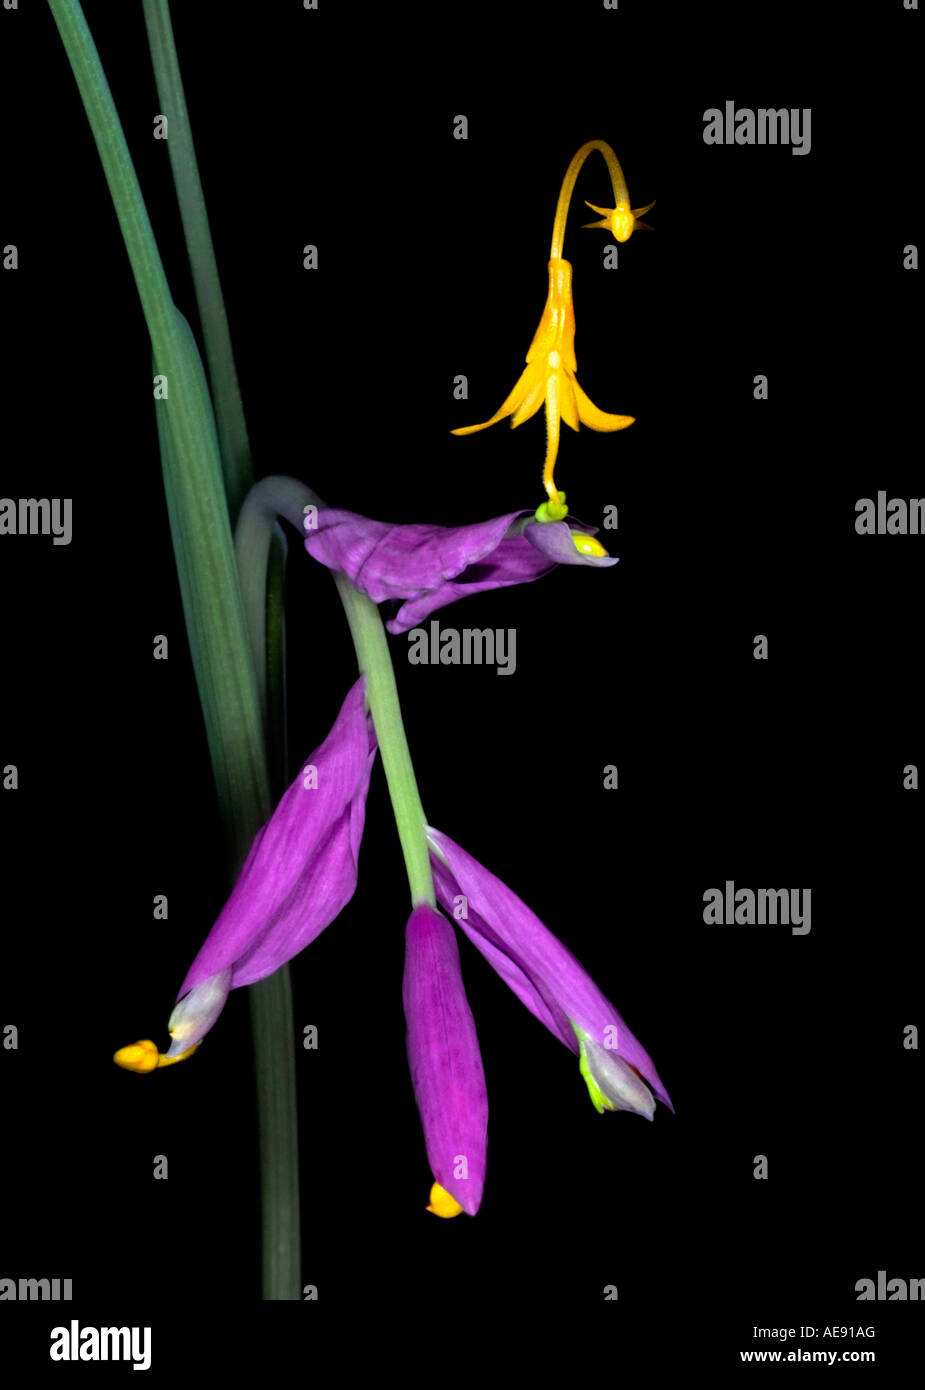 Dancing Ladies ginger (Globba winitii) - unique yellow and purple flower on black background Stock Photo